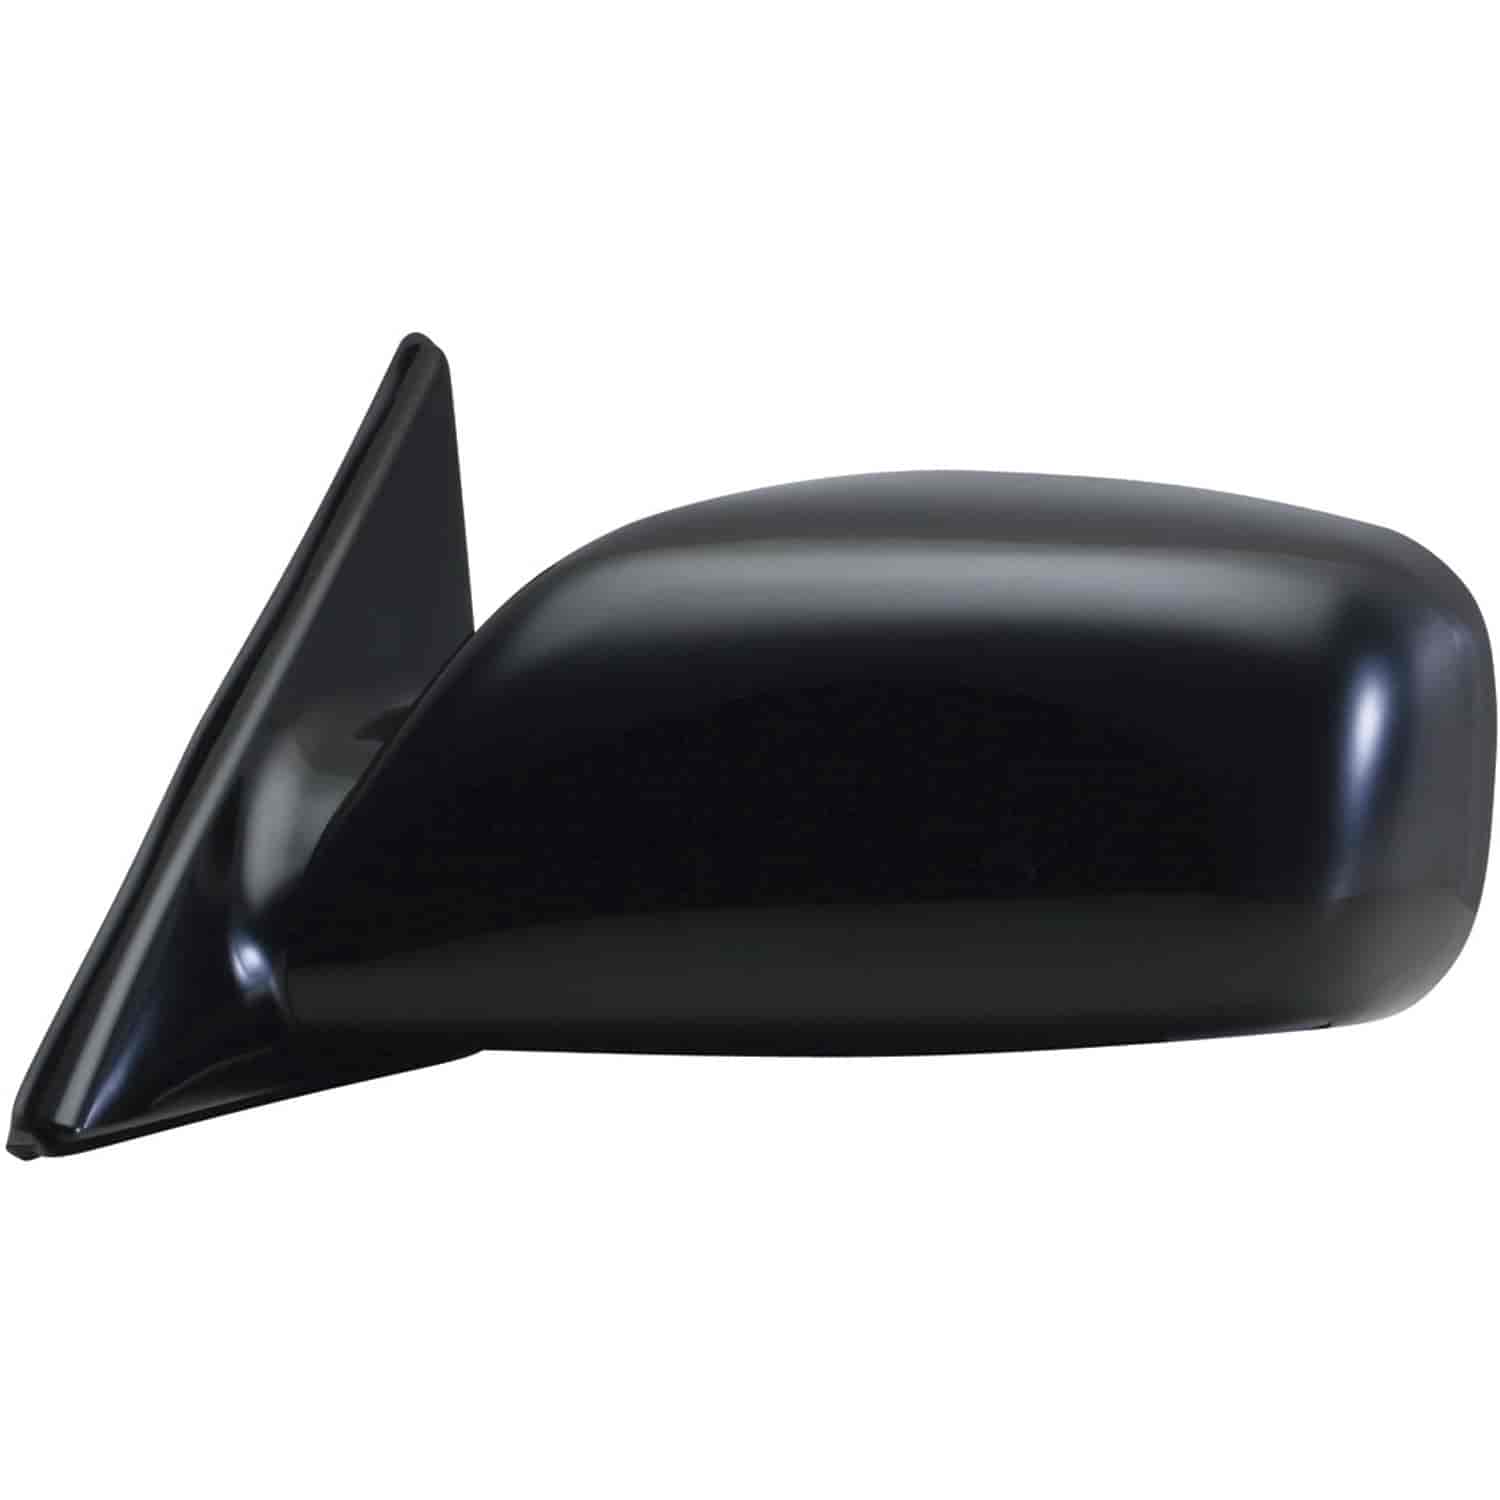 OEM Style Replacement mirror for 02-06 Toyota Camry Japan built driver side mirror tested to fit and